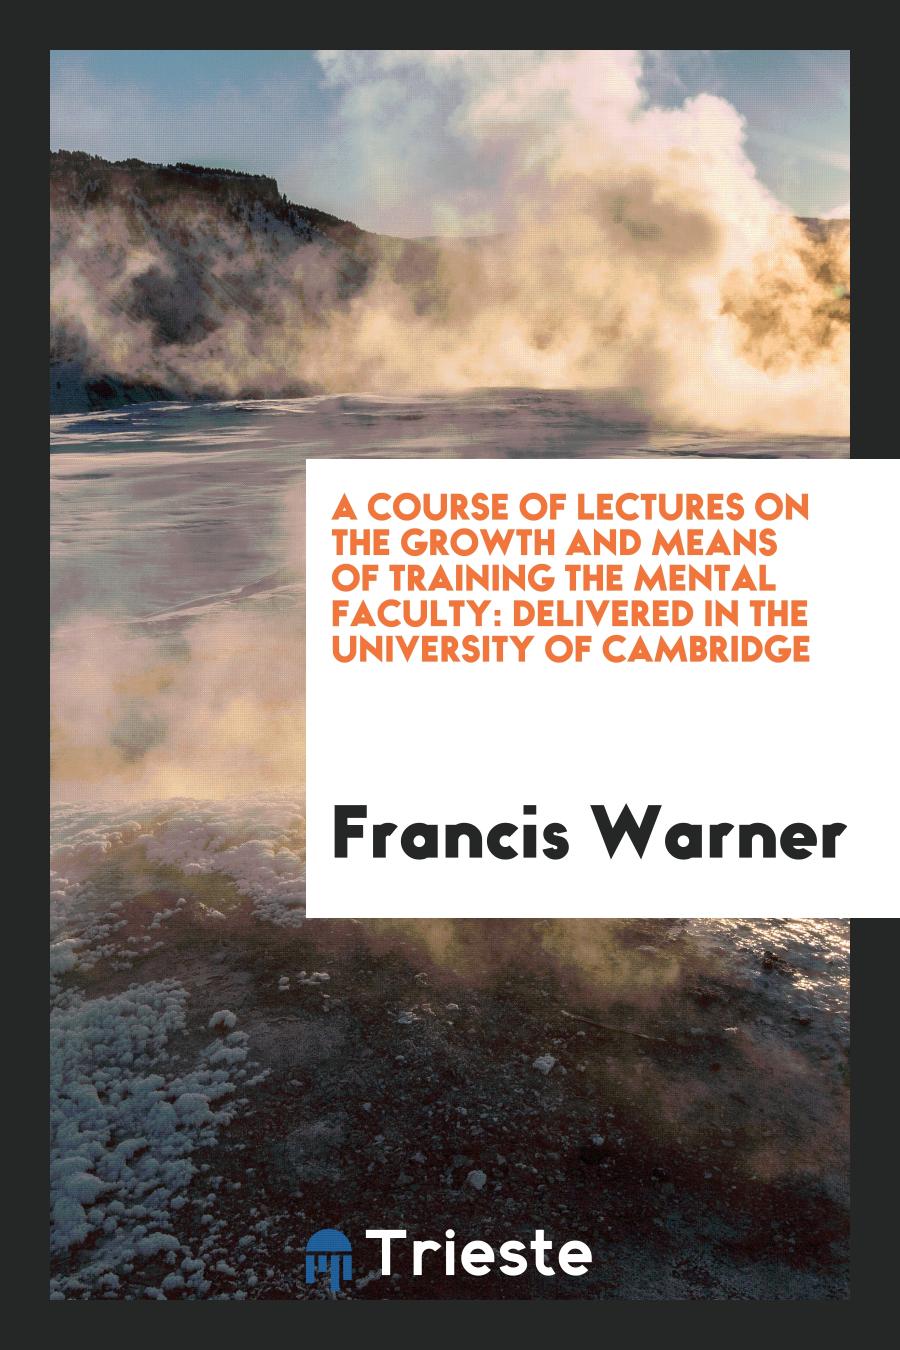 A Course of Lectures on the Growth and Means of Training the Mental Faculty: Delivered in the University of Cambridge